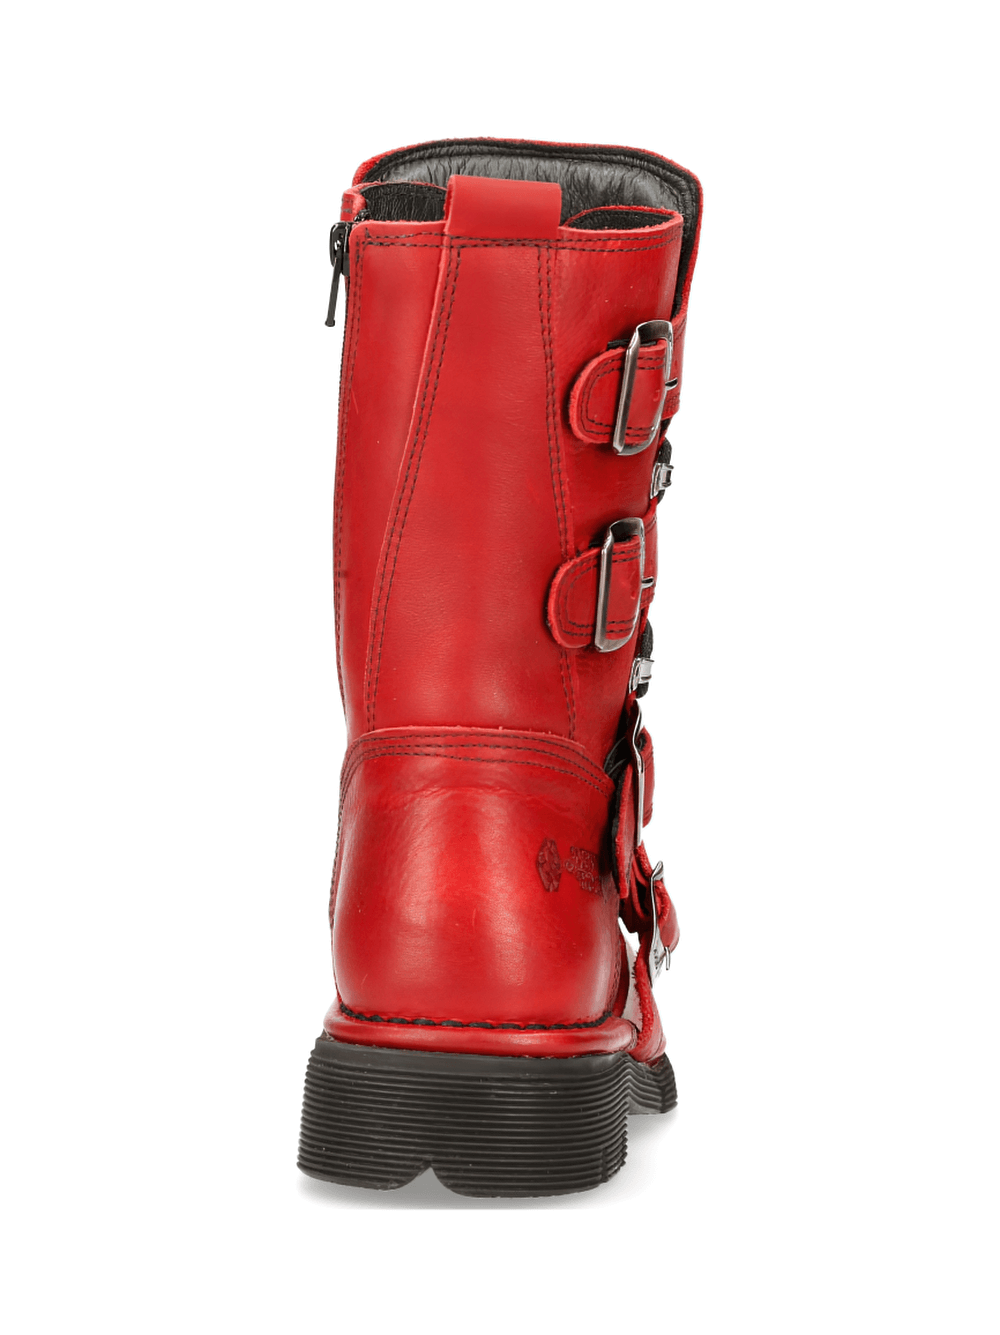 NEW ROCK Red Cow Leather Military Style Combat Boots